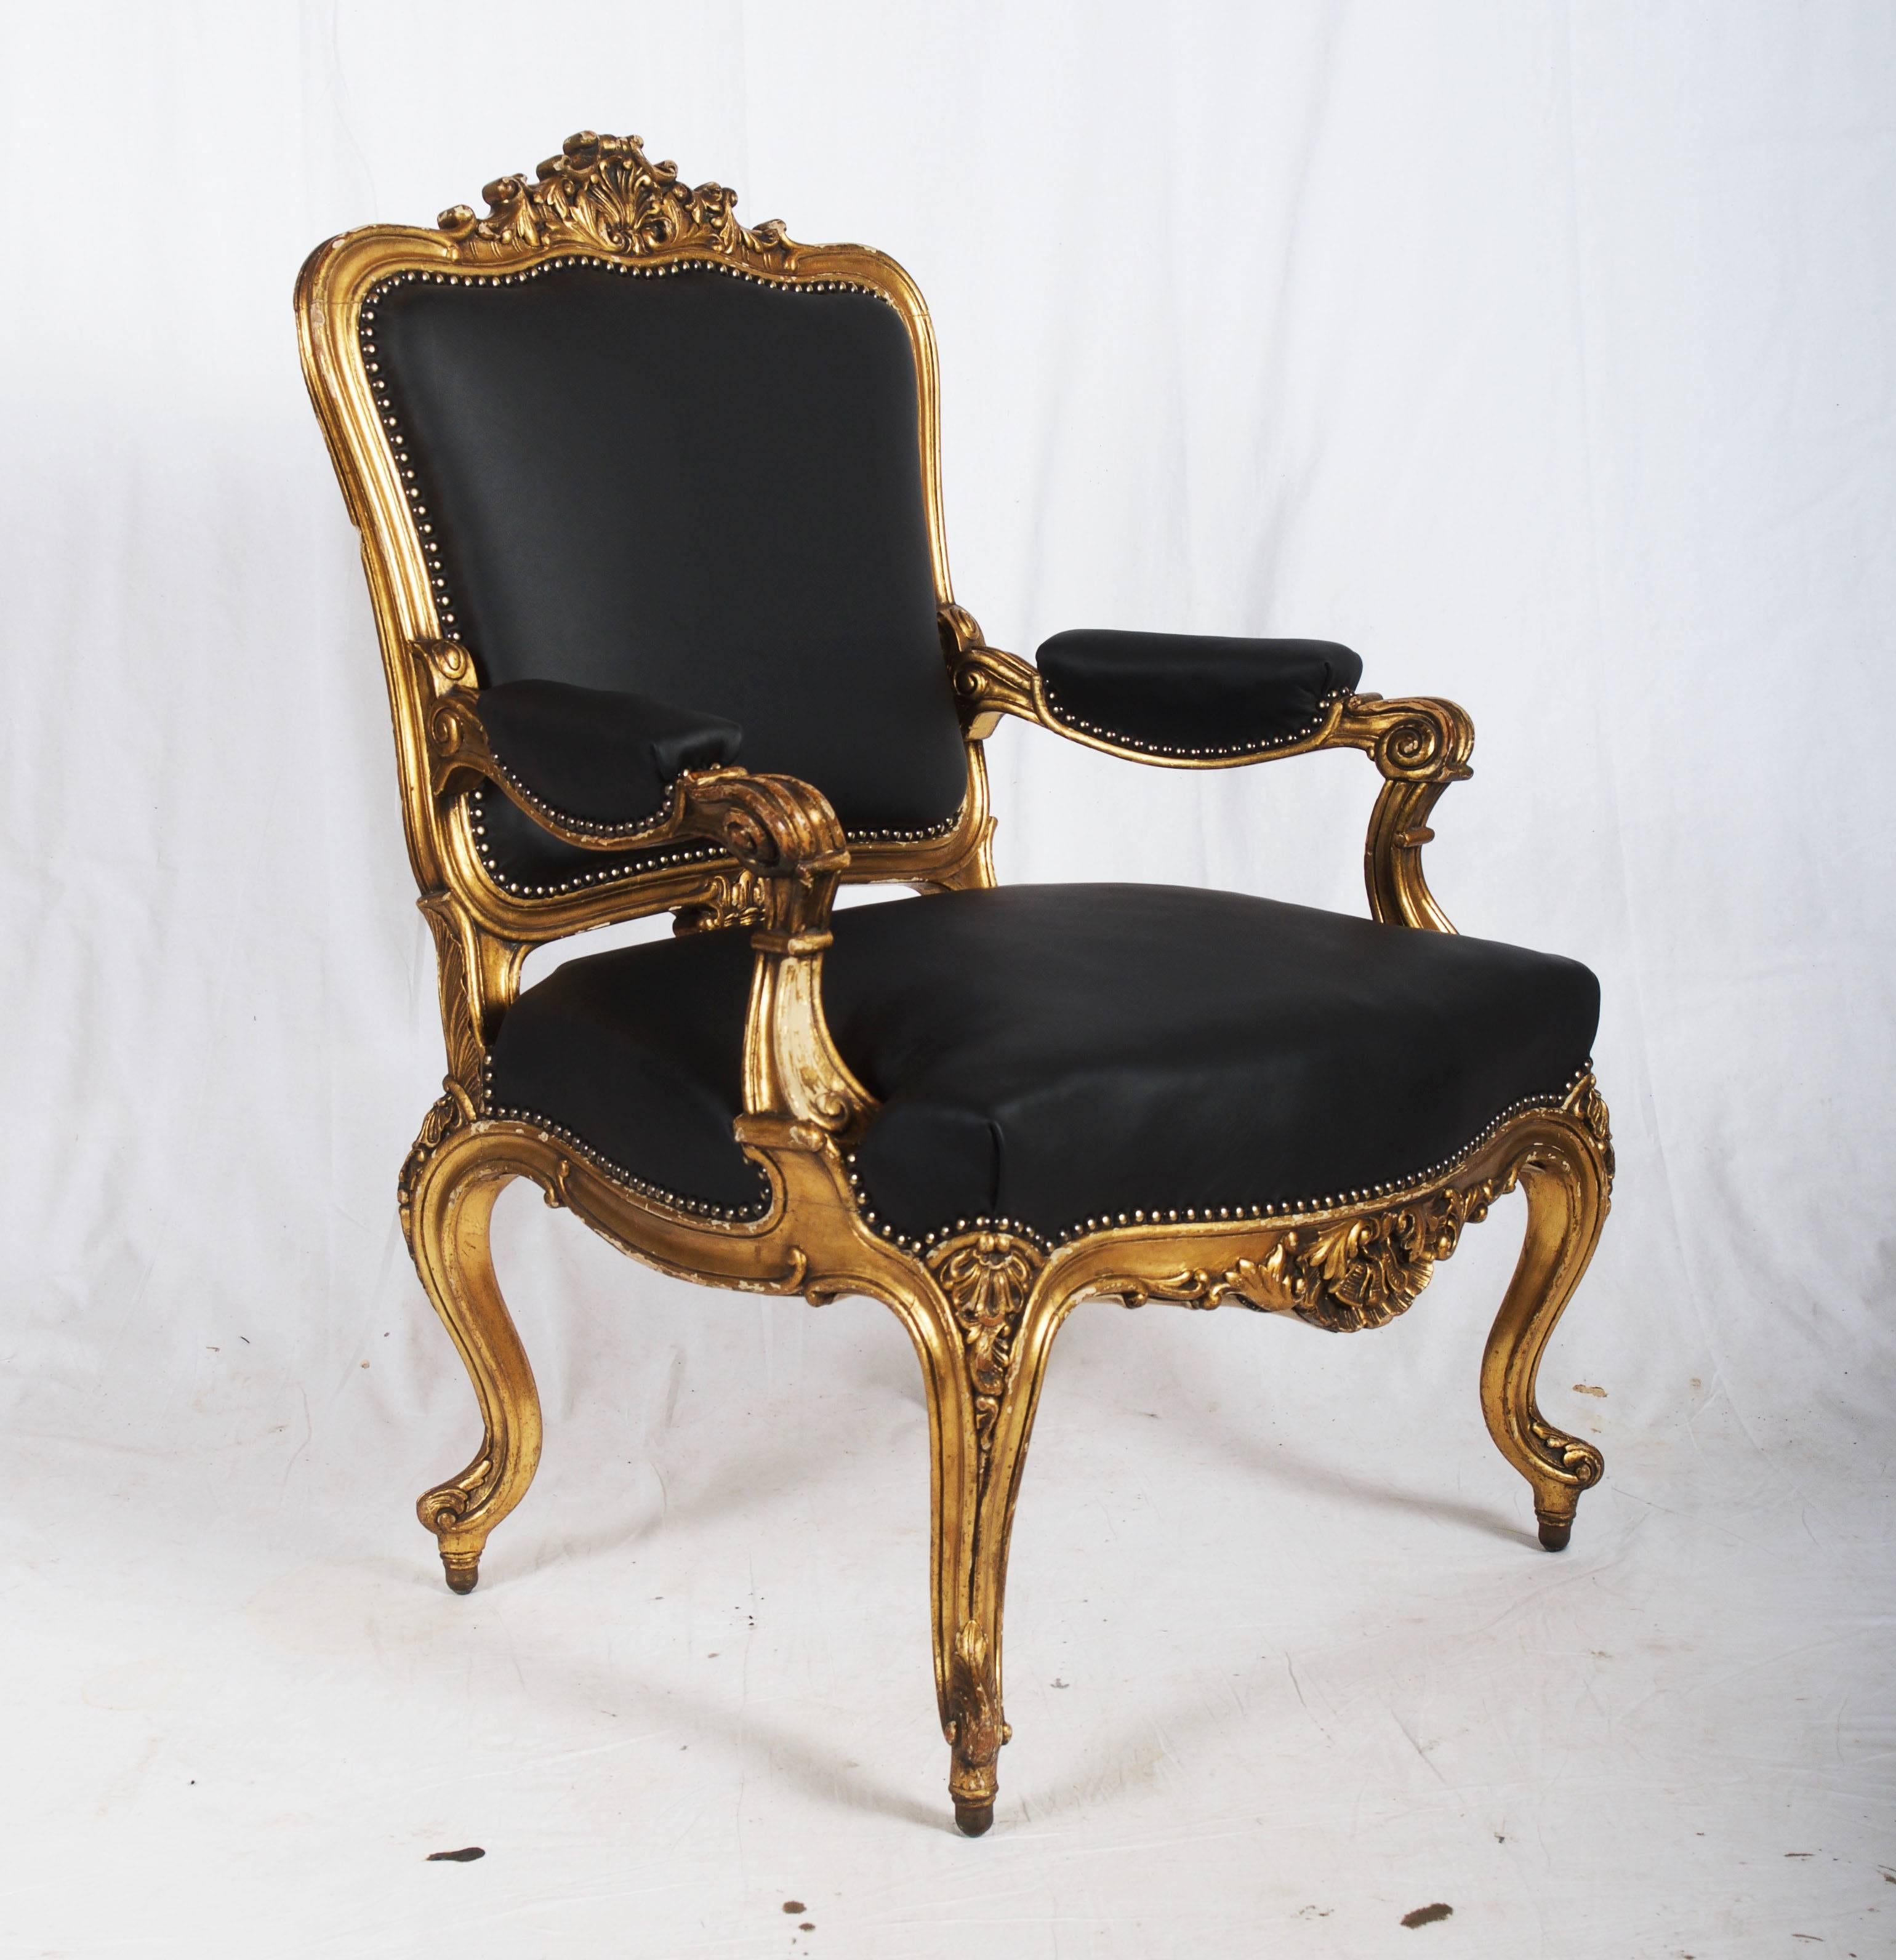 Rococo style black leather upholstered open armchair and on cabriole legs with balls on the ends, gold plated. Made in Austria in the middle of the 19th century.
Excellent condition with new upholstery with seat springs, straw and horse hair.